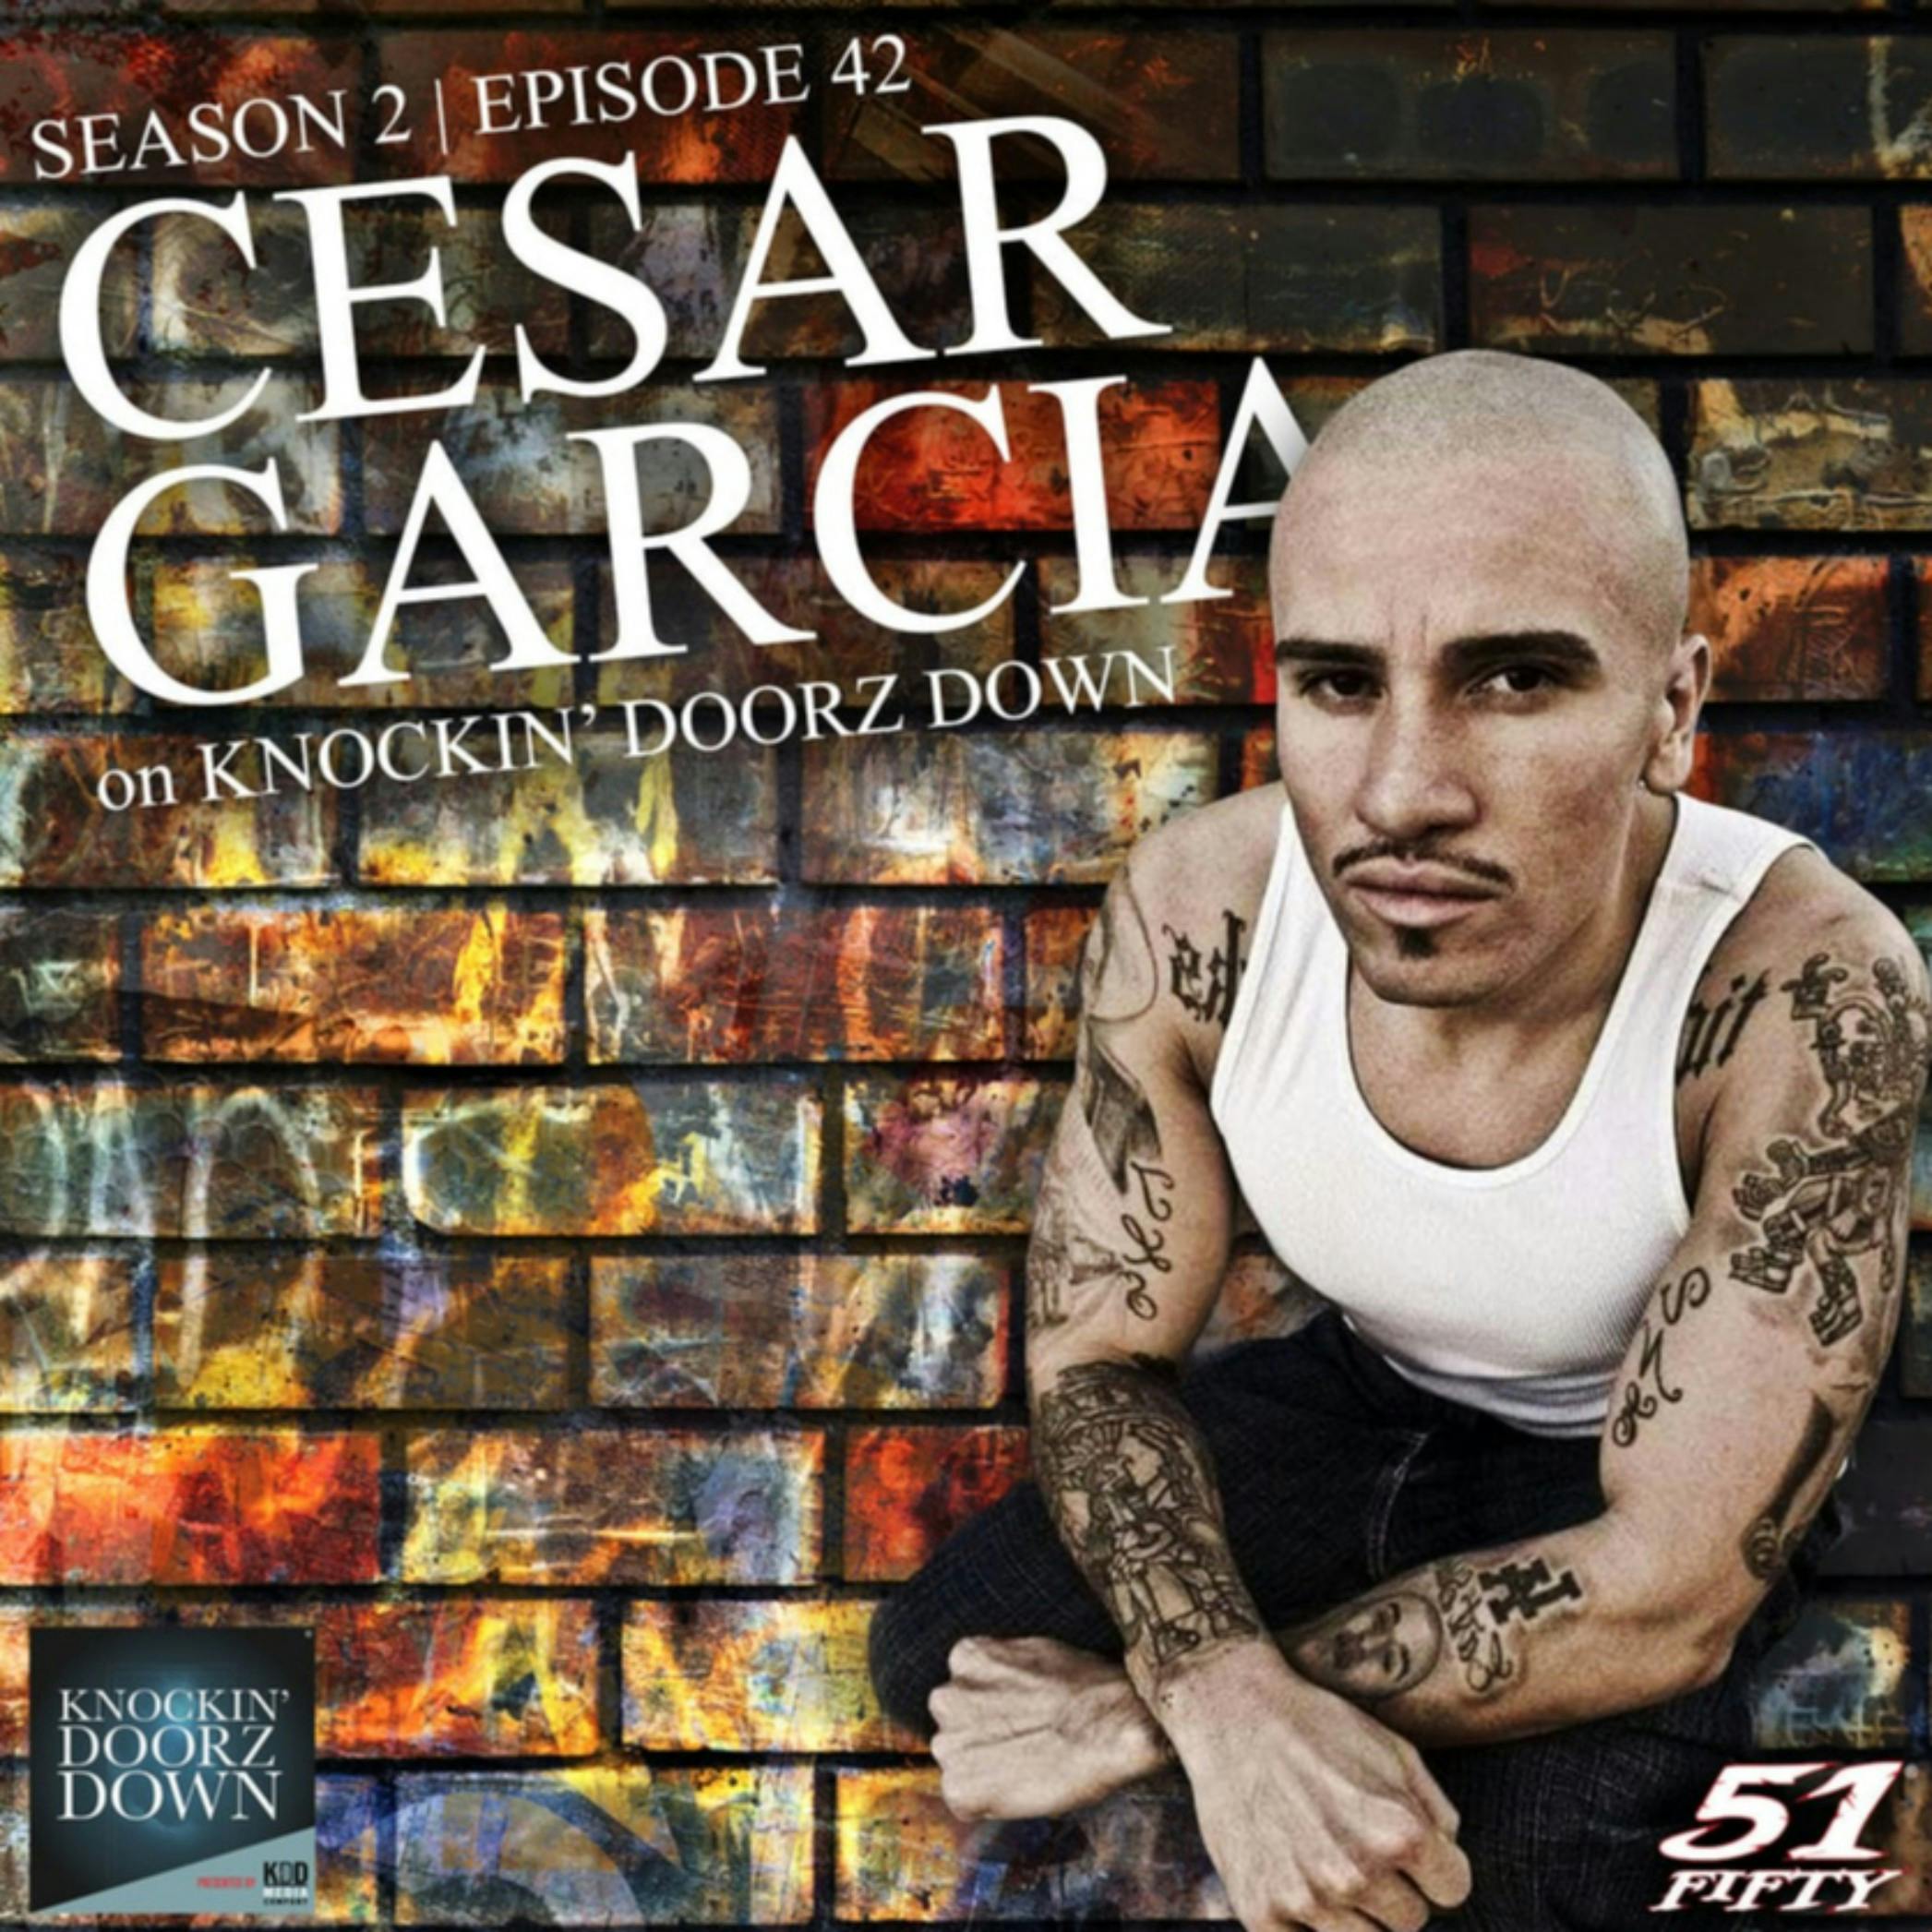 Cesar Garcia | Gang Life, Drugs, Redemption, Breaking Bad, Fast and The Furious, Forgiveness, Actor & Advocate